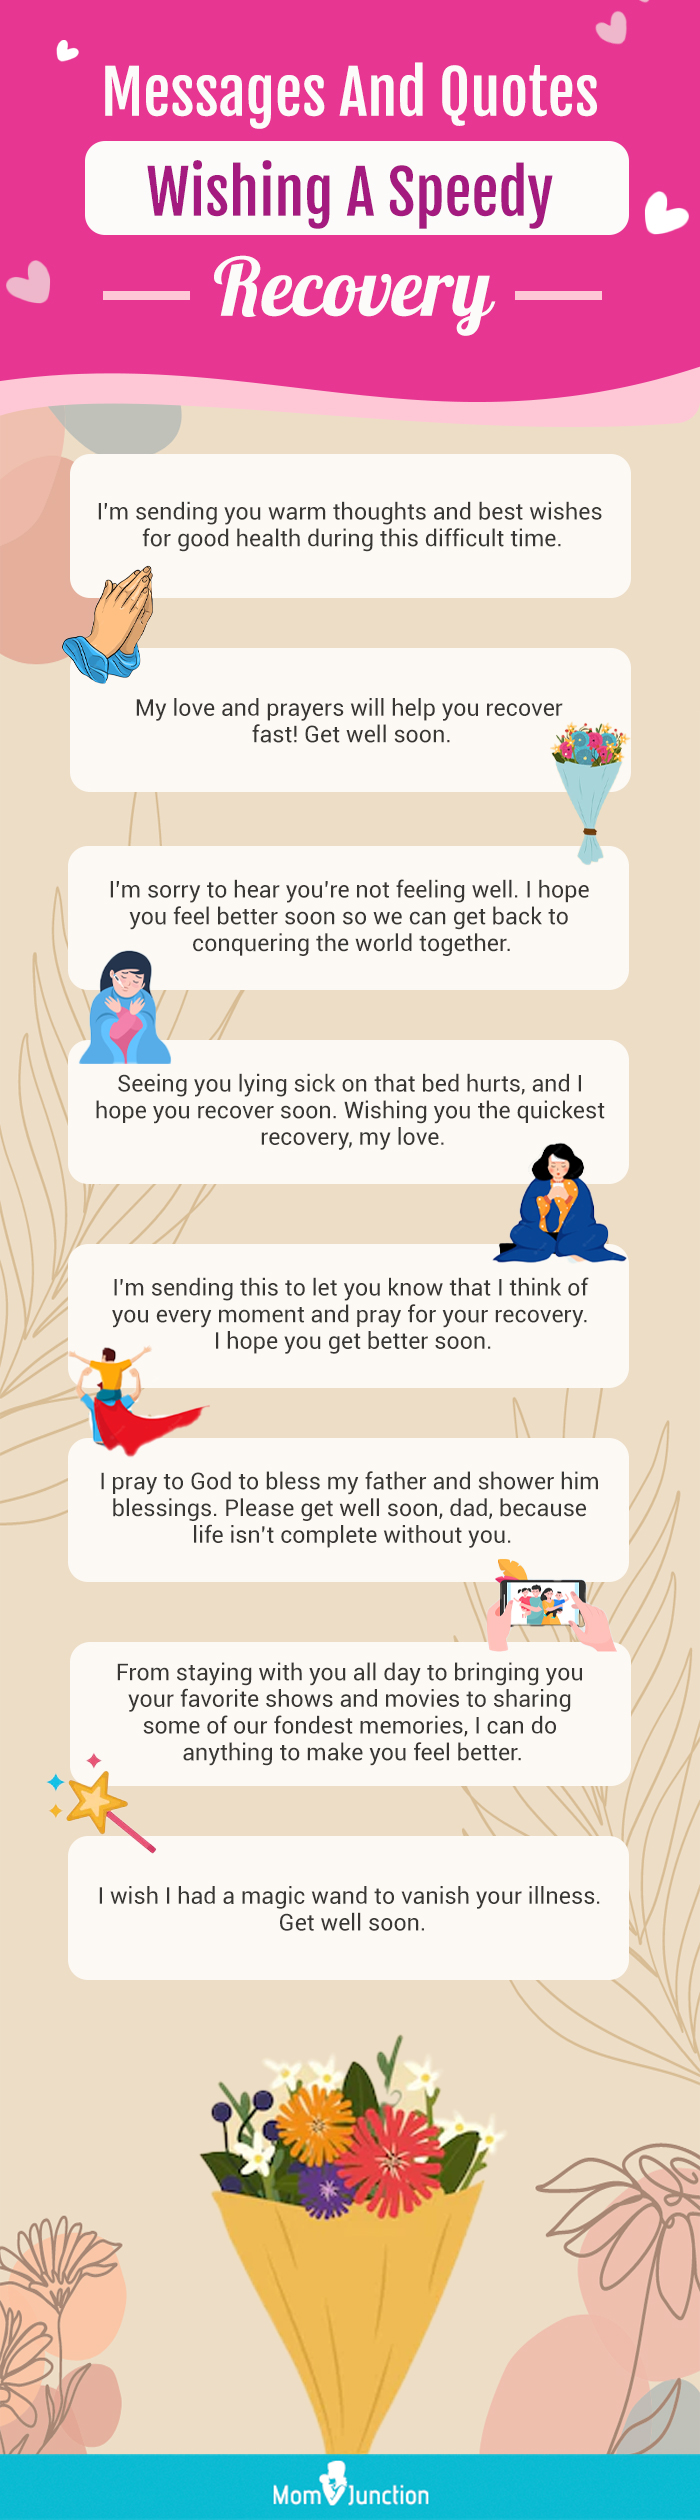 quotes wishing a speedy recovery (infographic)